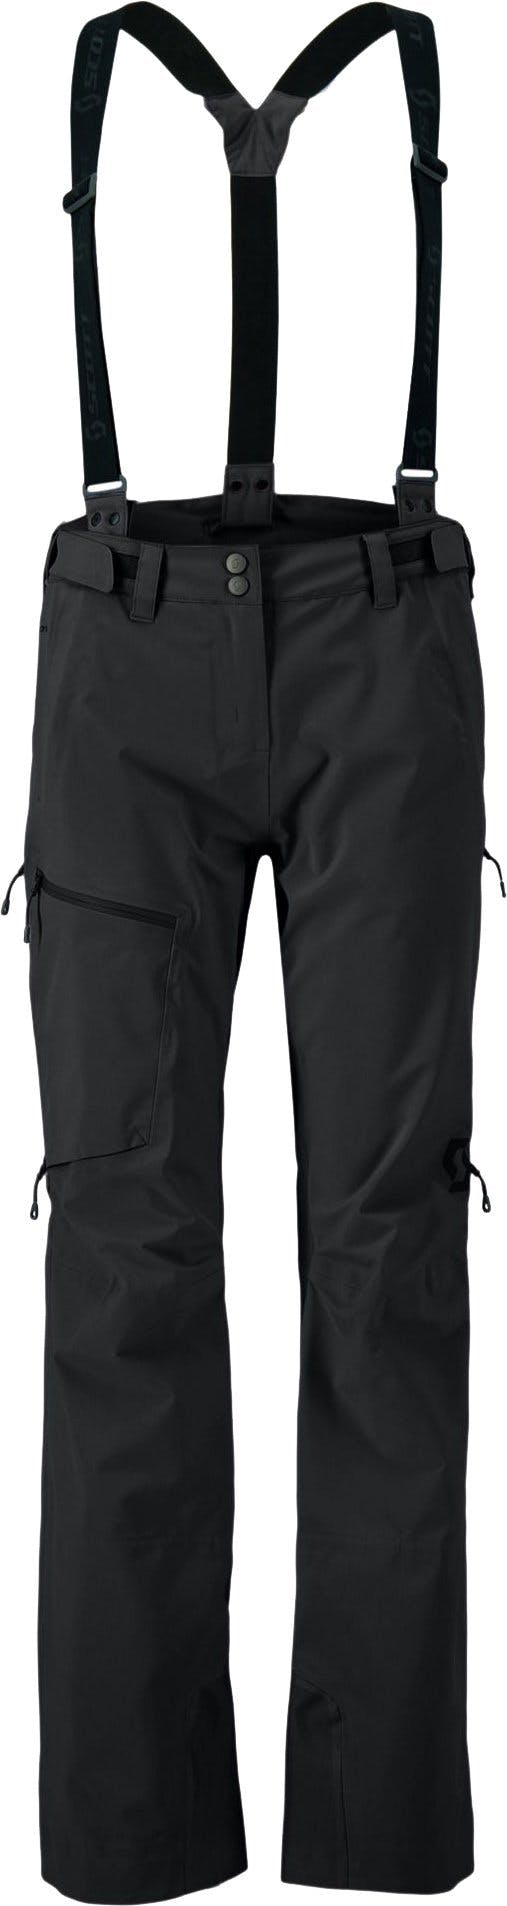 Product image for Explorair 3 Layer Pant - Women's